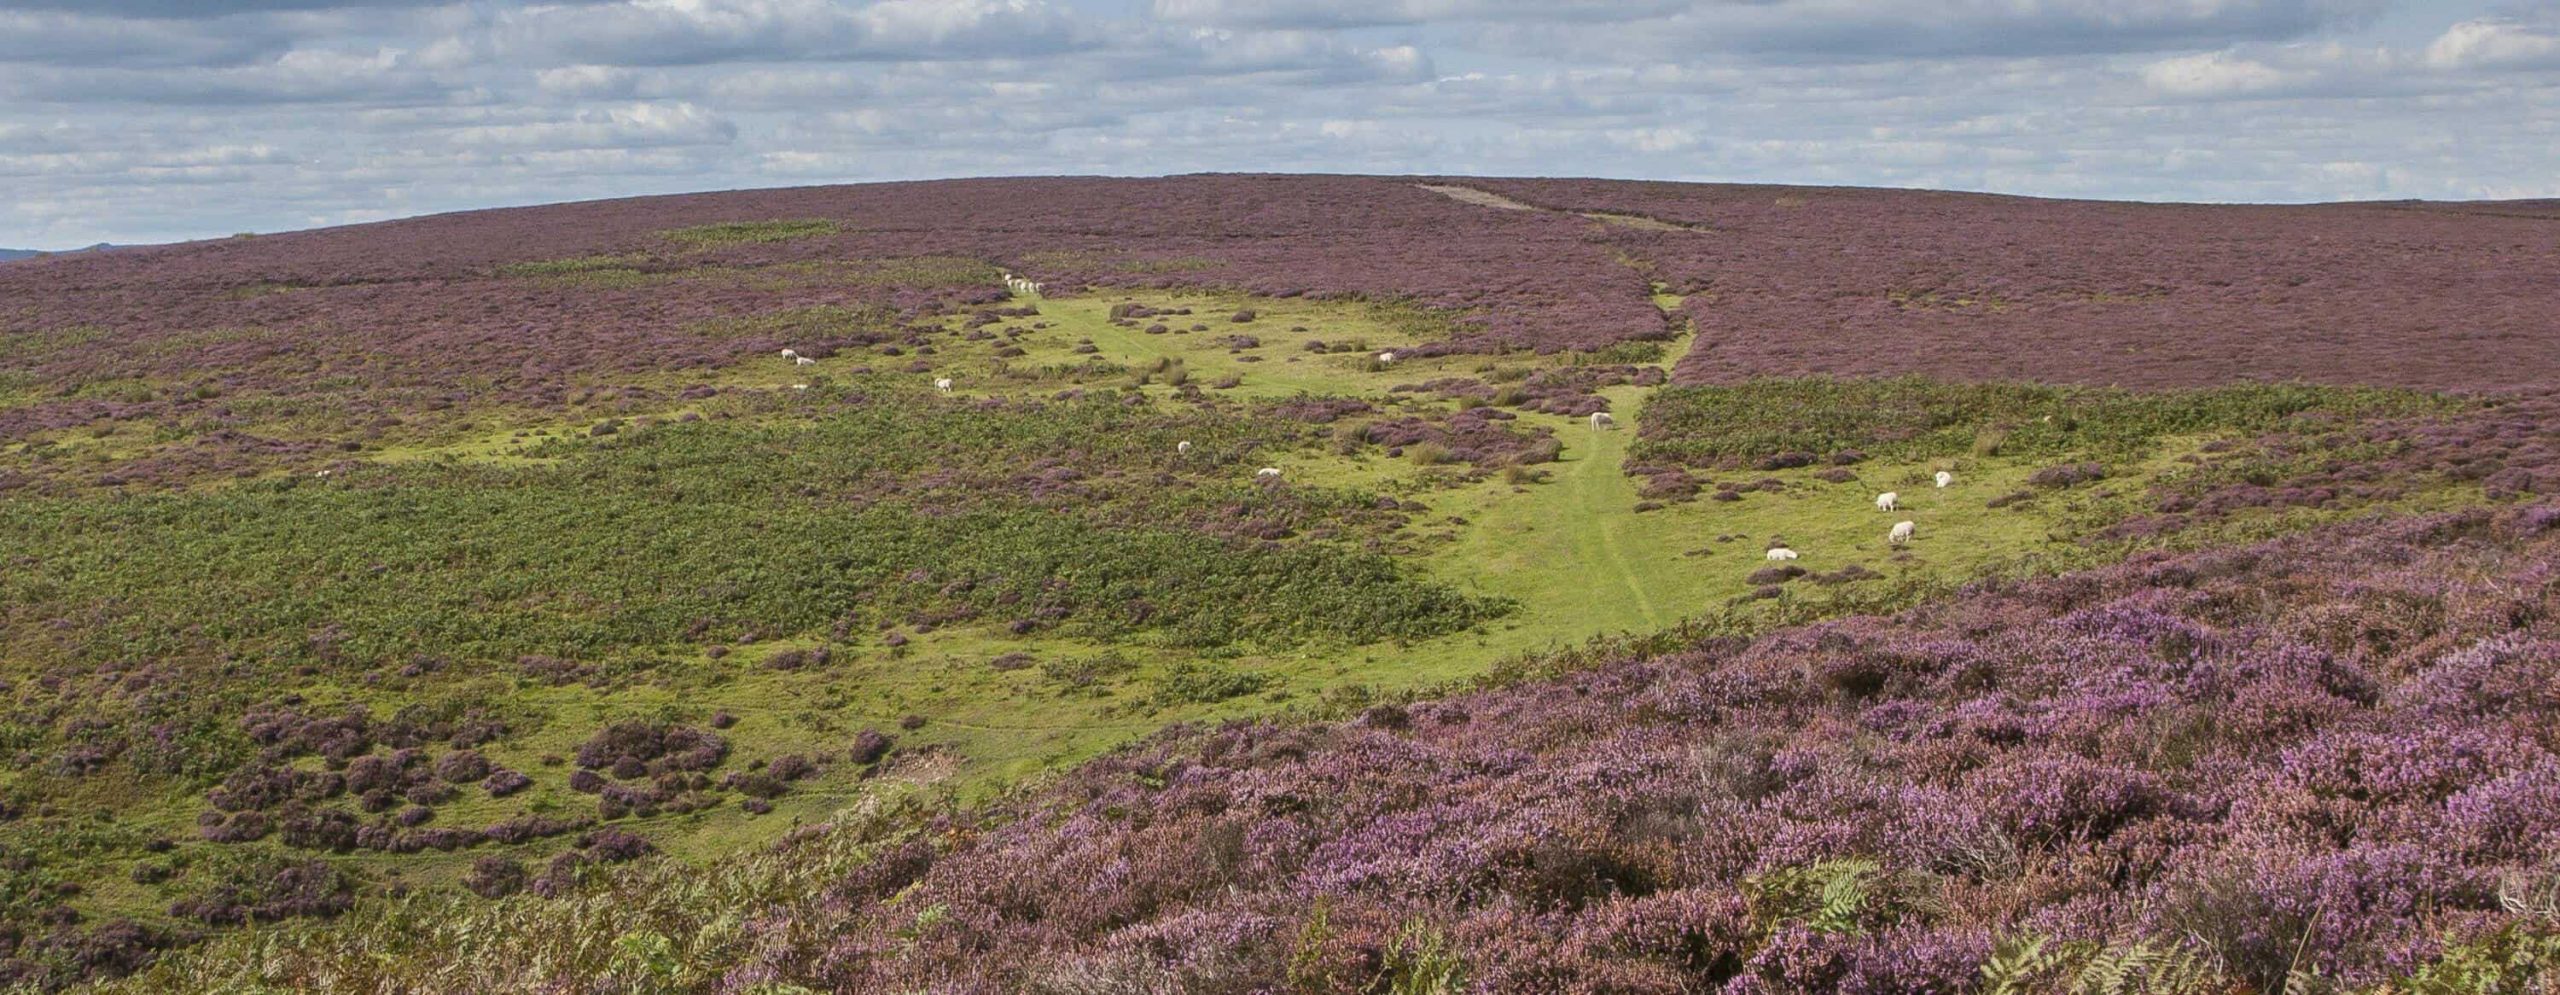 Purple haze of heather-rich hills hit by climate change, National Trust warns